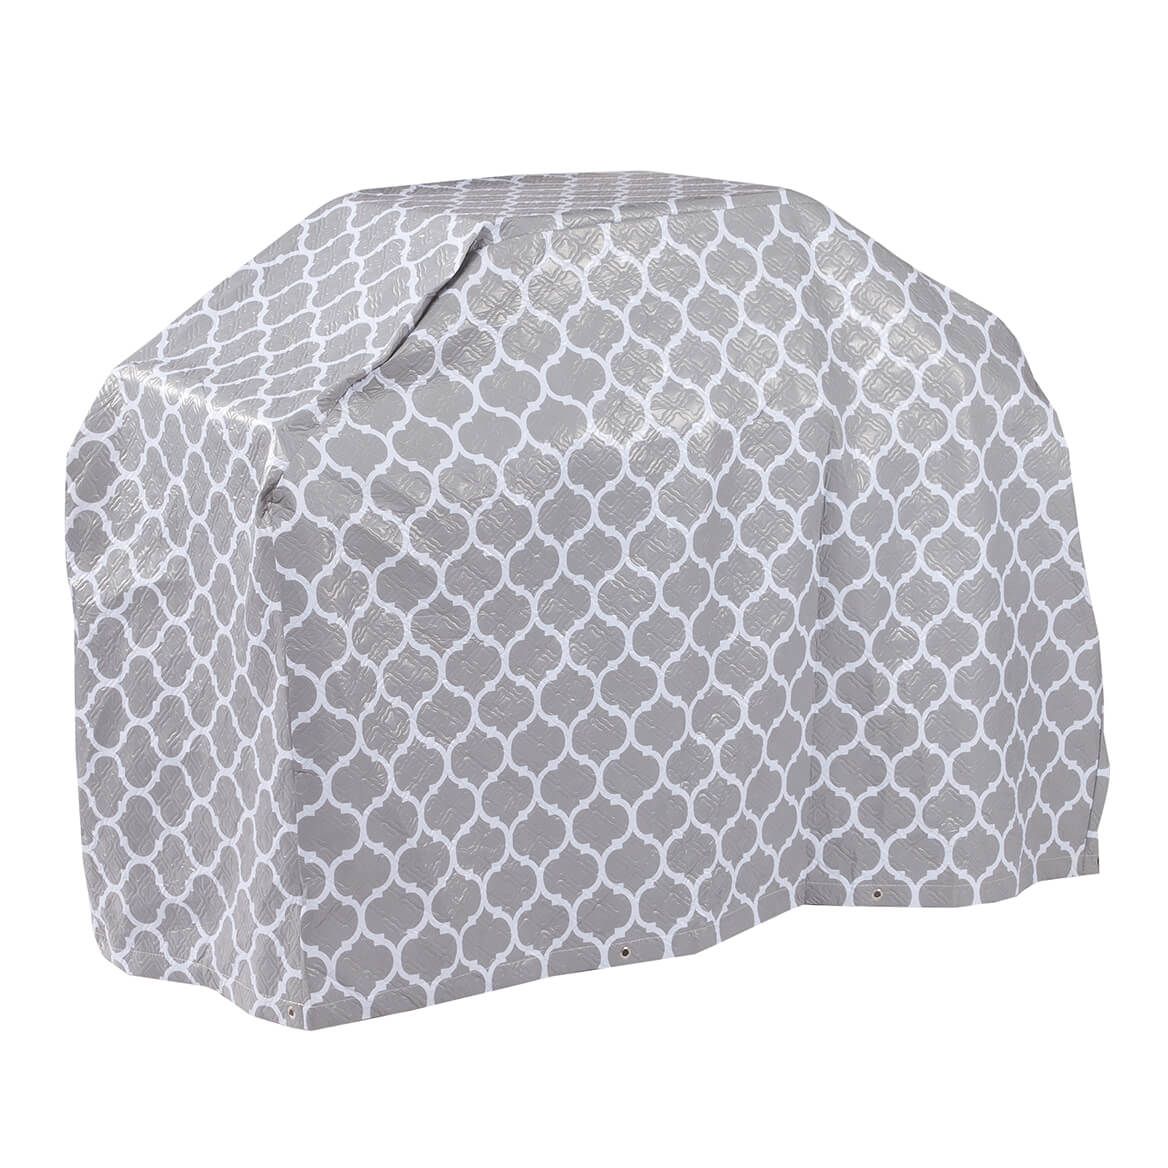 Trellis Pattern Quilted Wagon Grill Cover, 60"L x 42"H x 22" + '-' + 362894